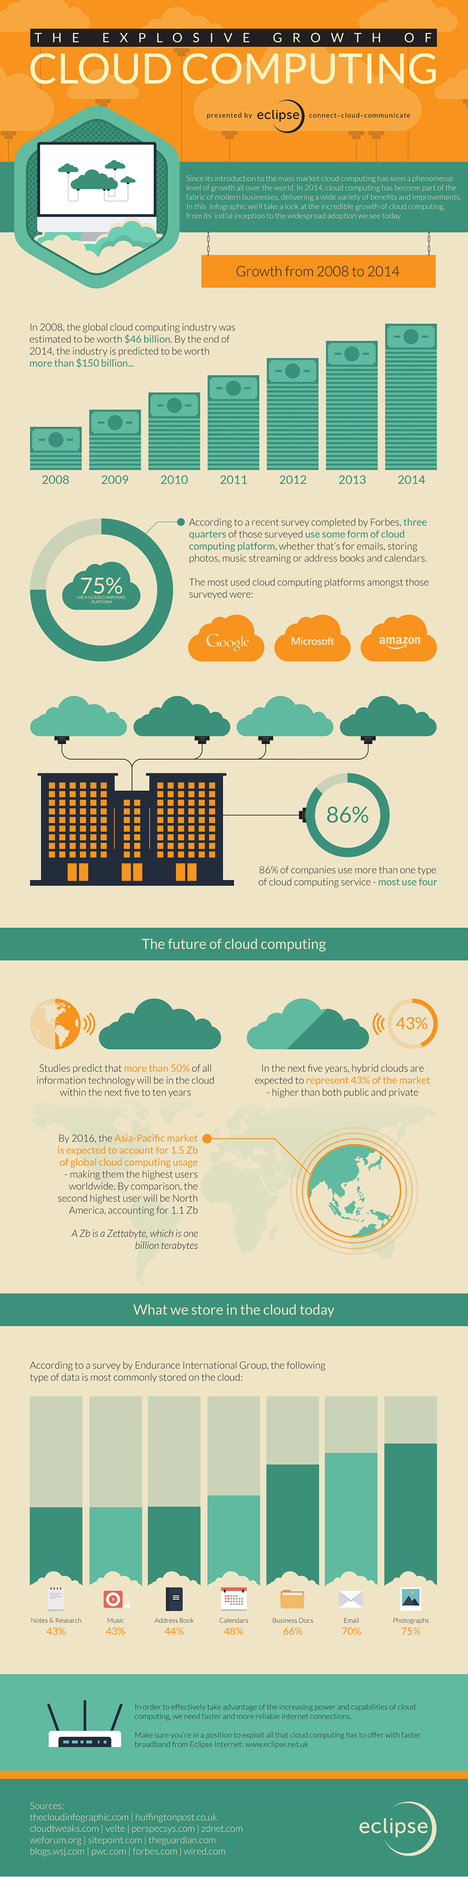 The Explosive Growth of Cloud Computing